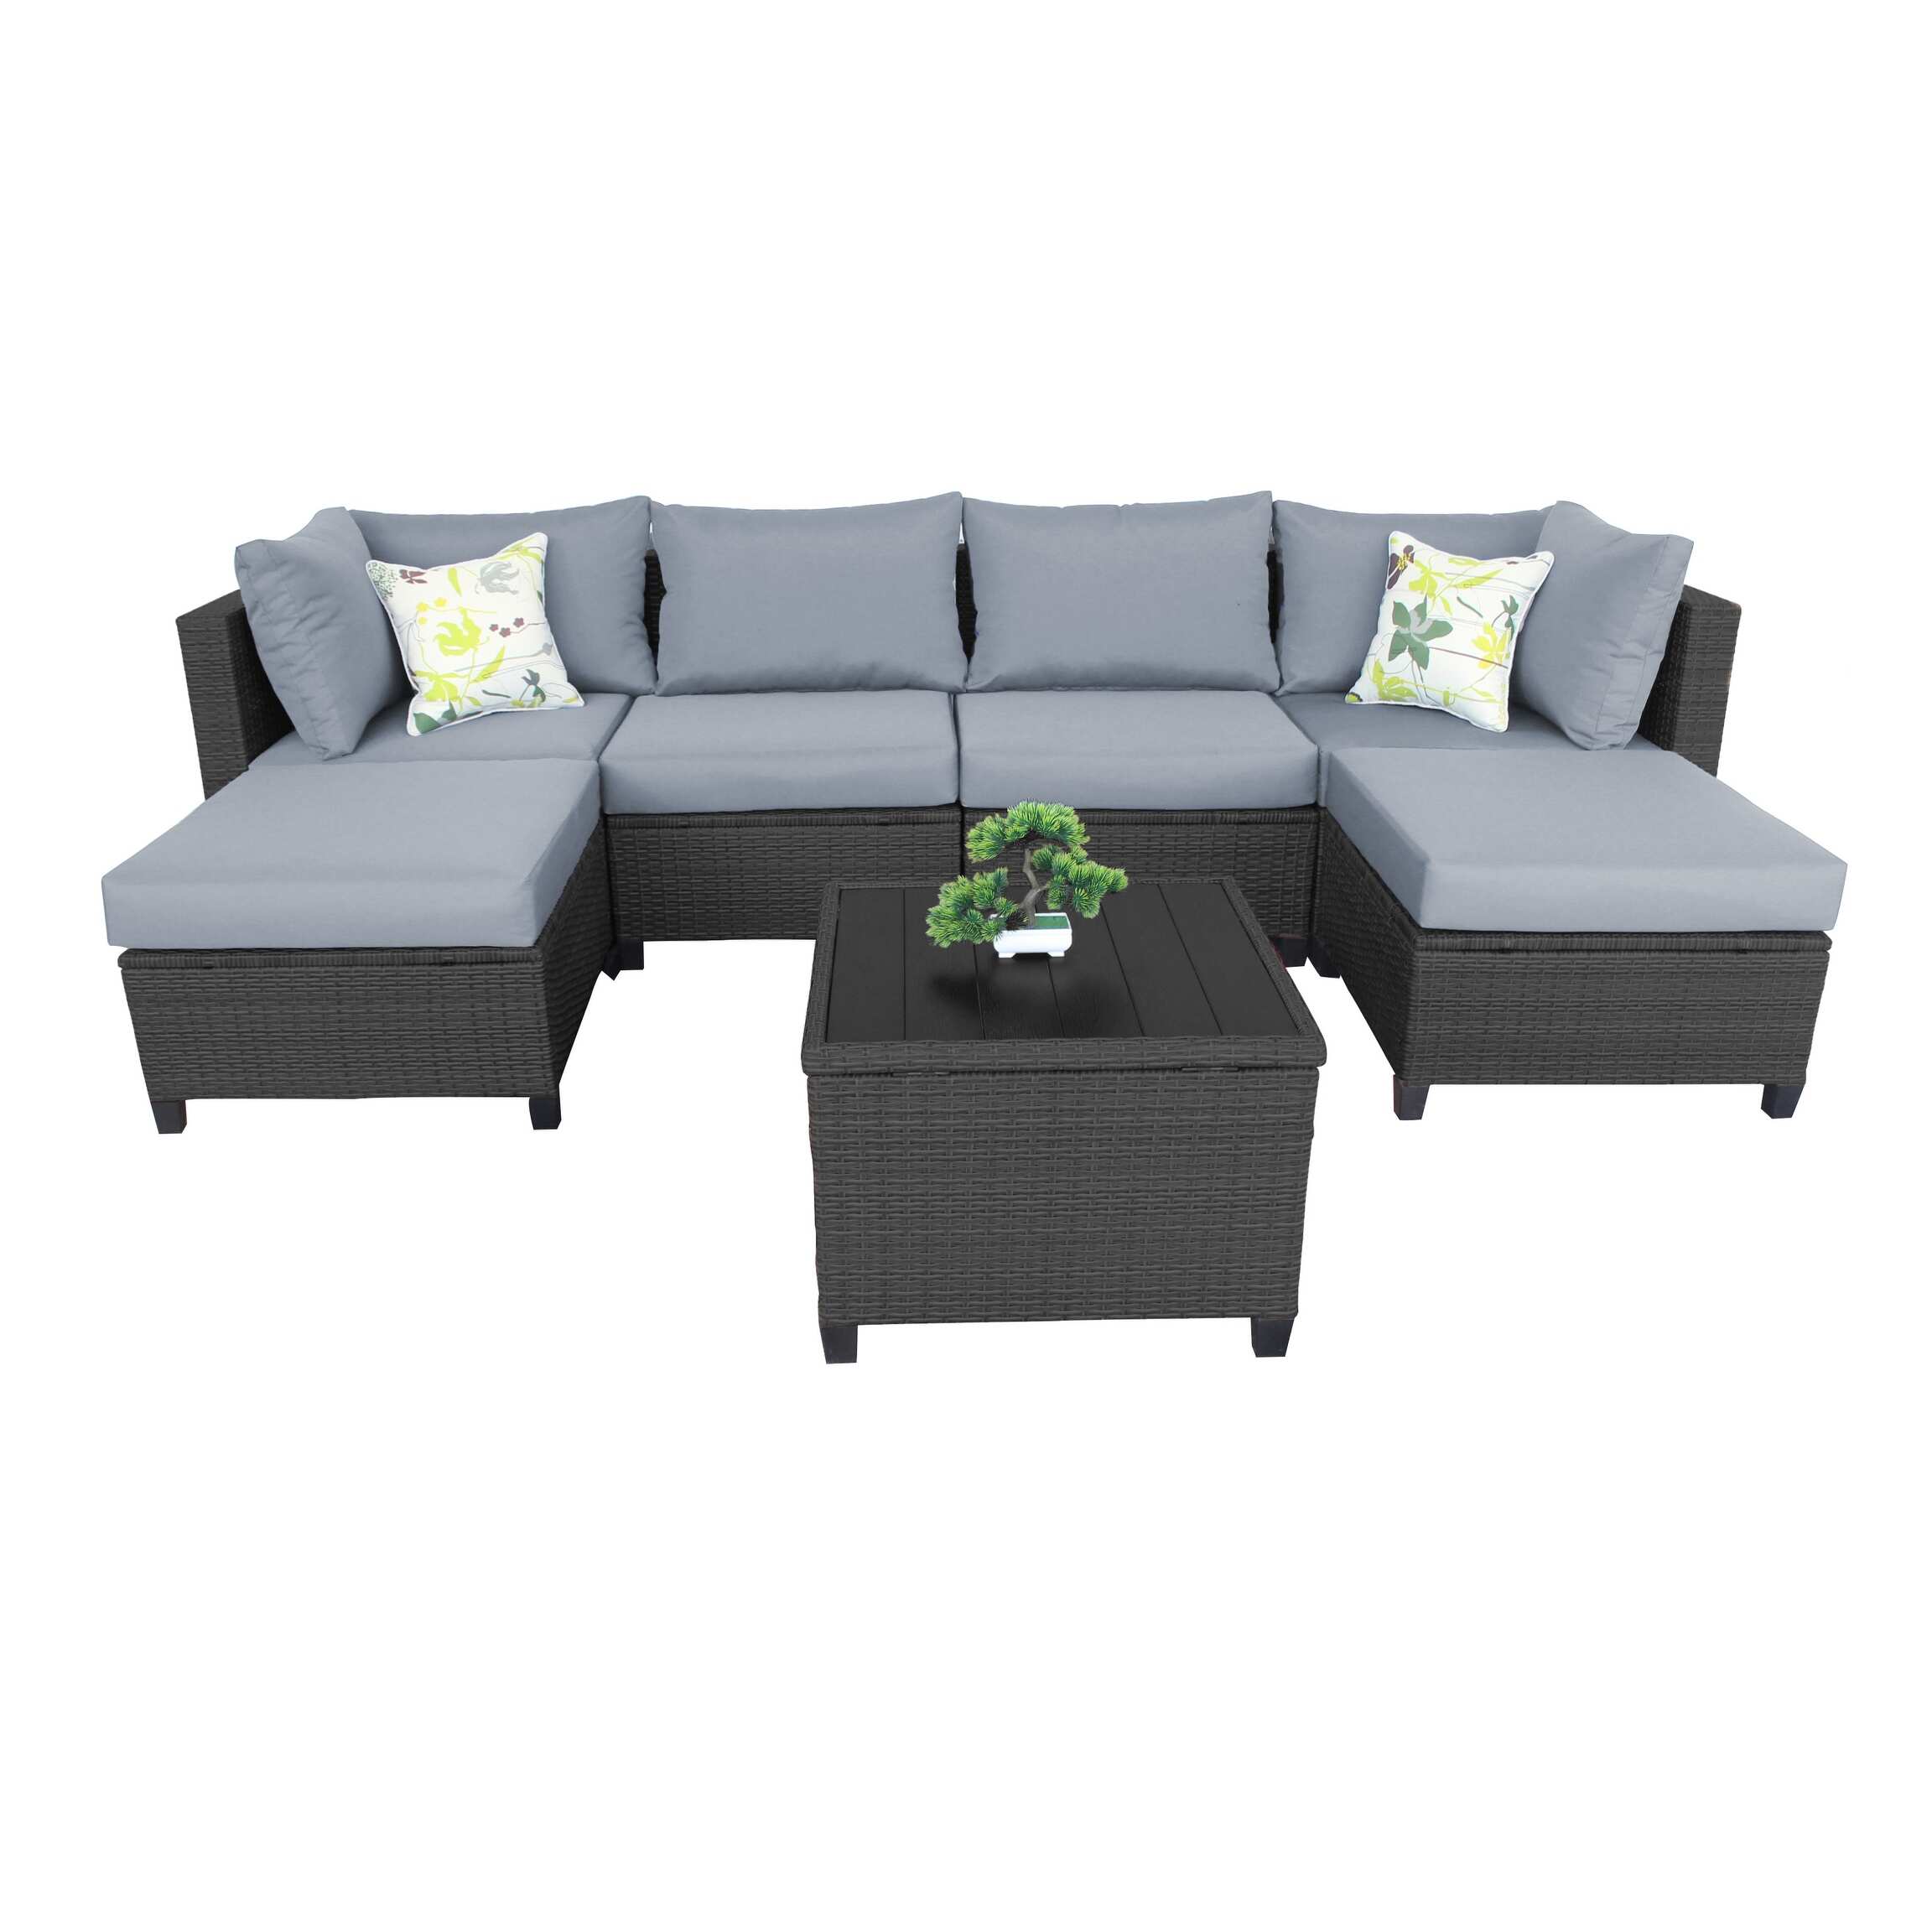 6-Seater Outdoor Wicker Sectional Sofa Set with Thick Cushion and Storage Function Table, All Weather Metal Frame - Gray